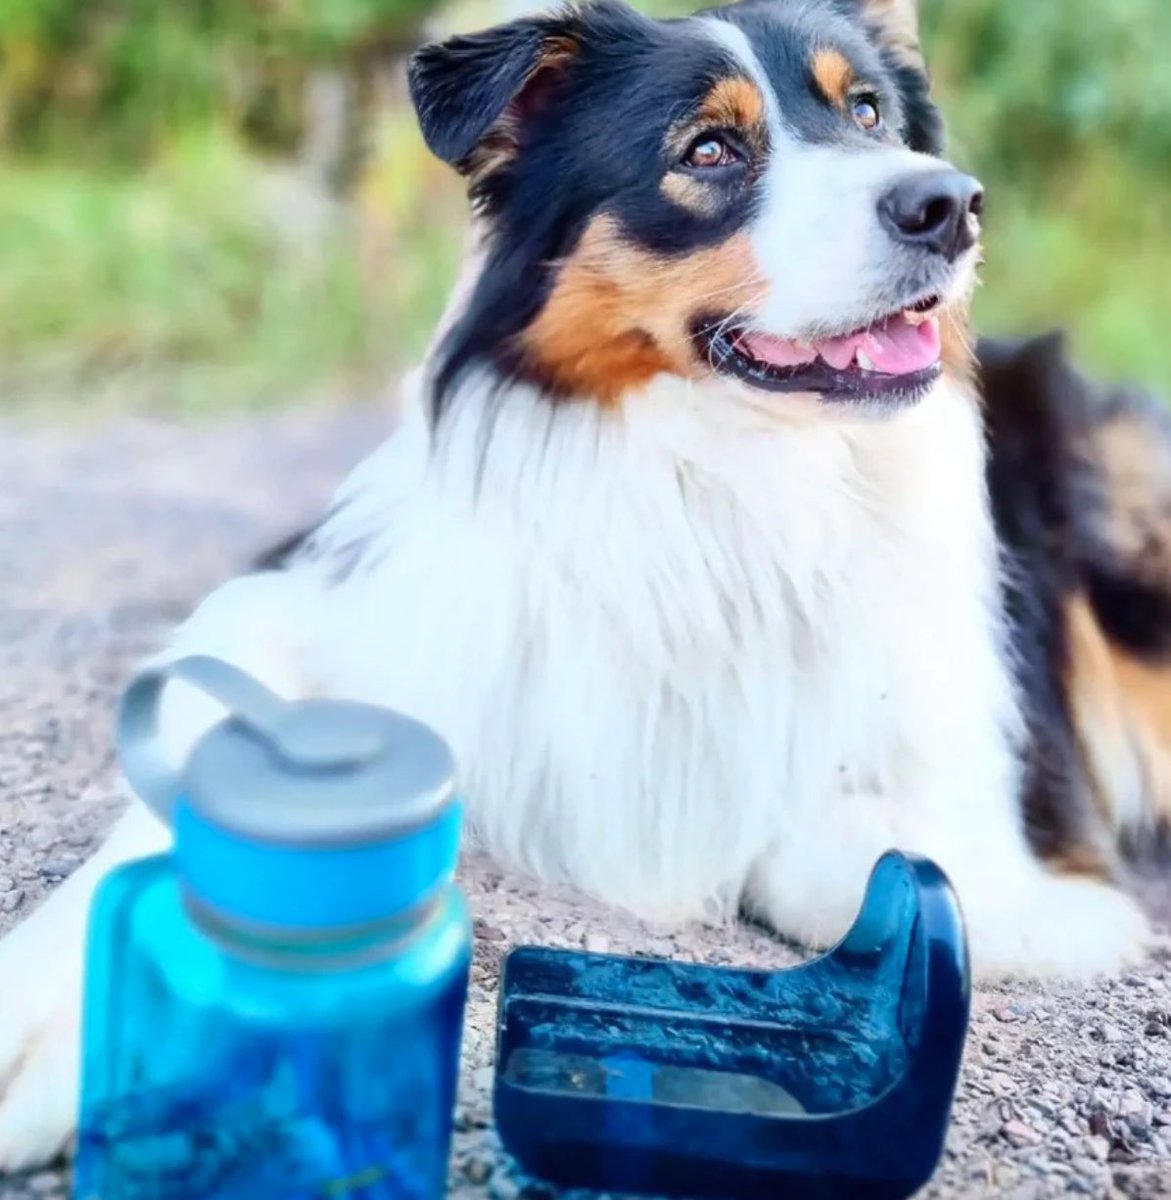 The #OllyBottle from #OllyDog is the solution. check out this clever #waterbottle 
alnk.to/9T7mo9v ⬅️

 #outdoorsy #outdoorsygeardeals #outdoordeals #outdoorsygirl #outdoordog #outdoordogs #outdoordoglife #outdoordoggear #outdoorsydog #outdoorsydogs #outdoorsydogmom